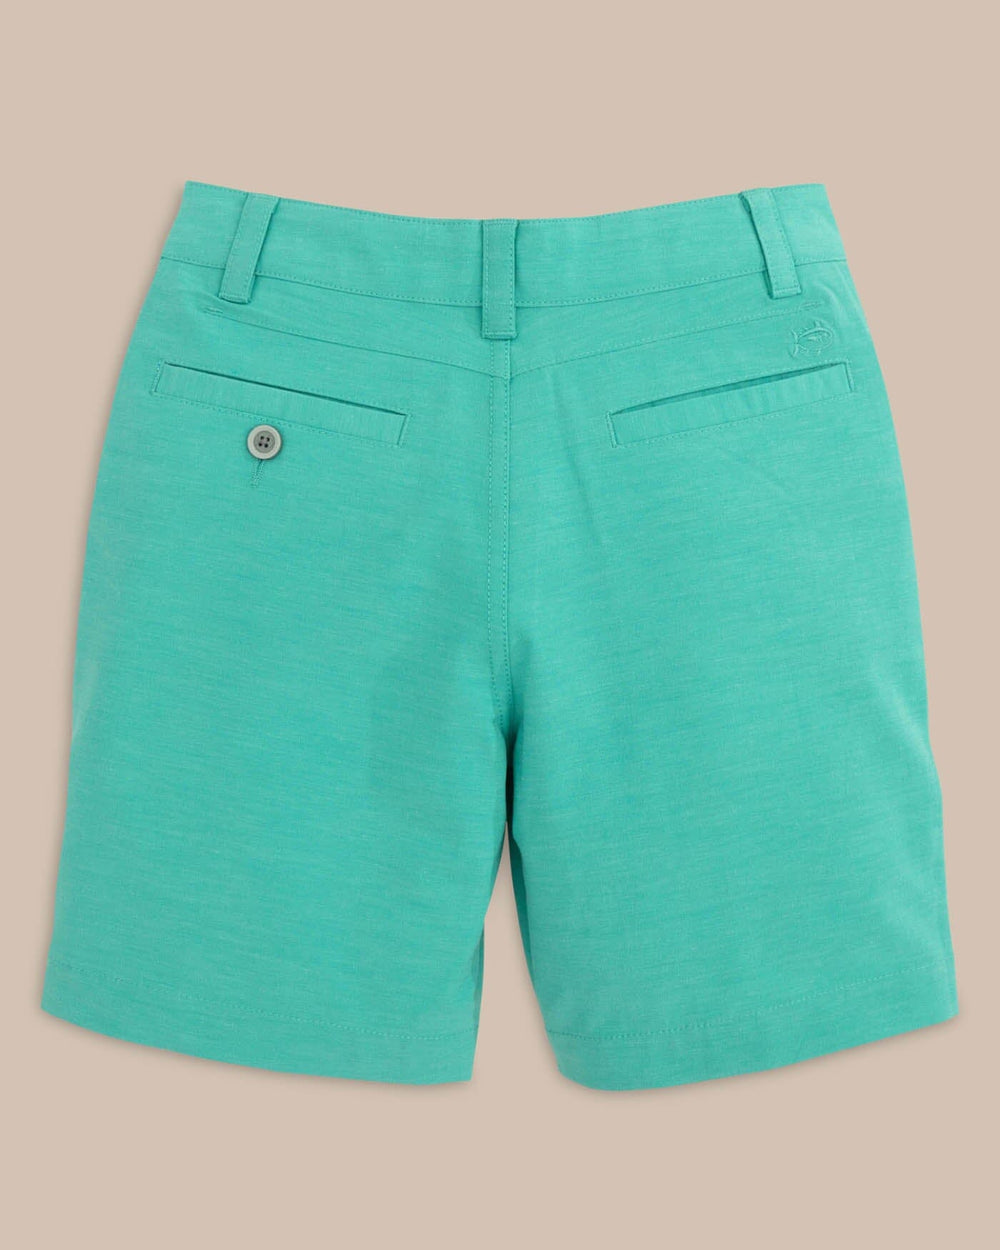 The back view of the Southern Tide Boys Heathered T3 Gulf Short by Southern Tide - Heather Tidal Wave